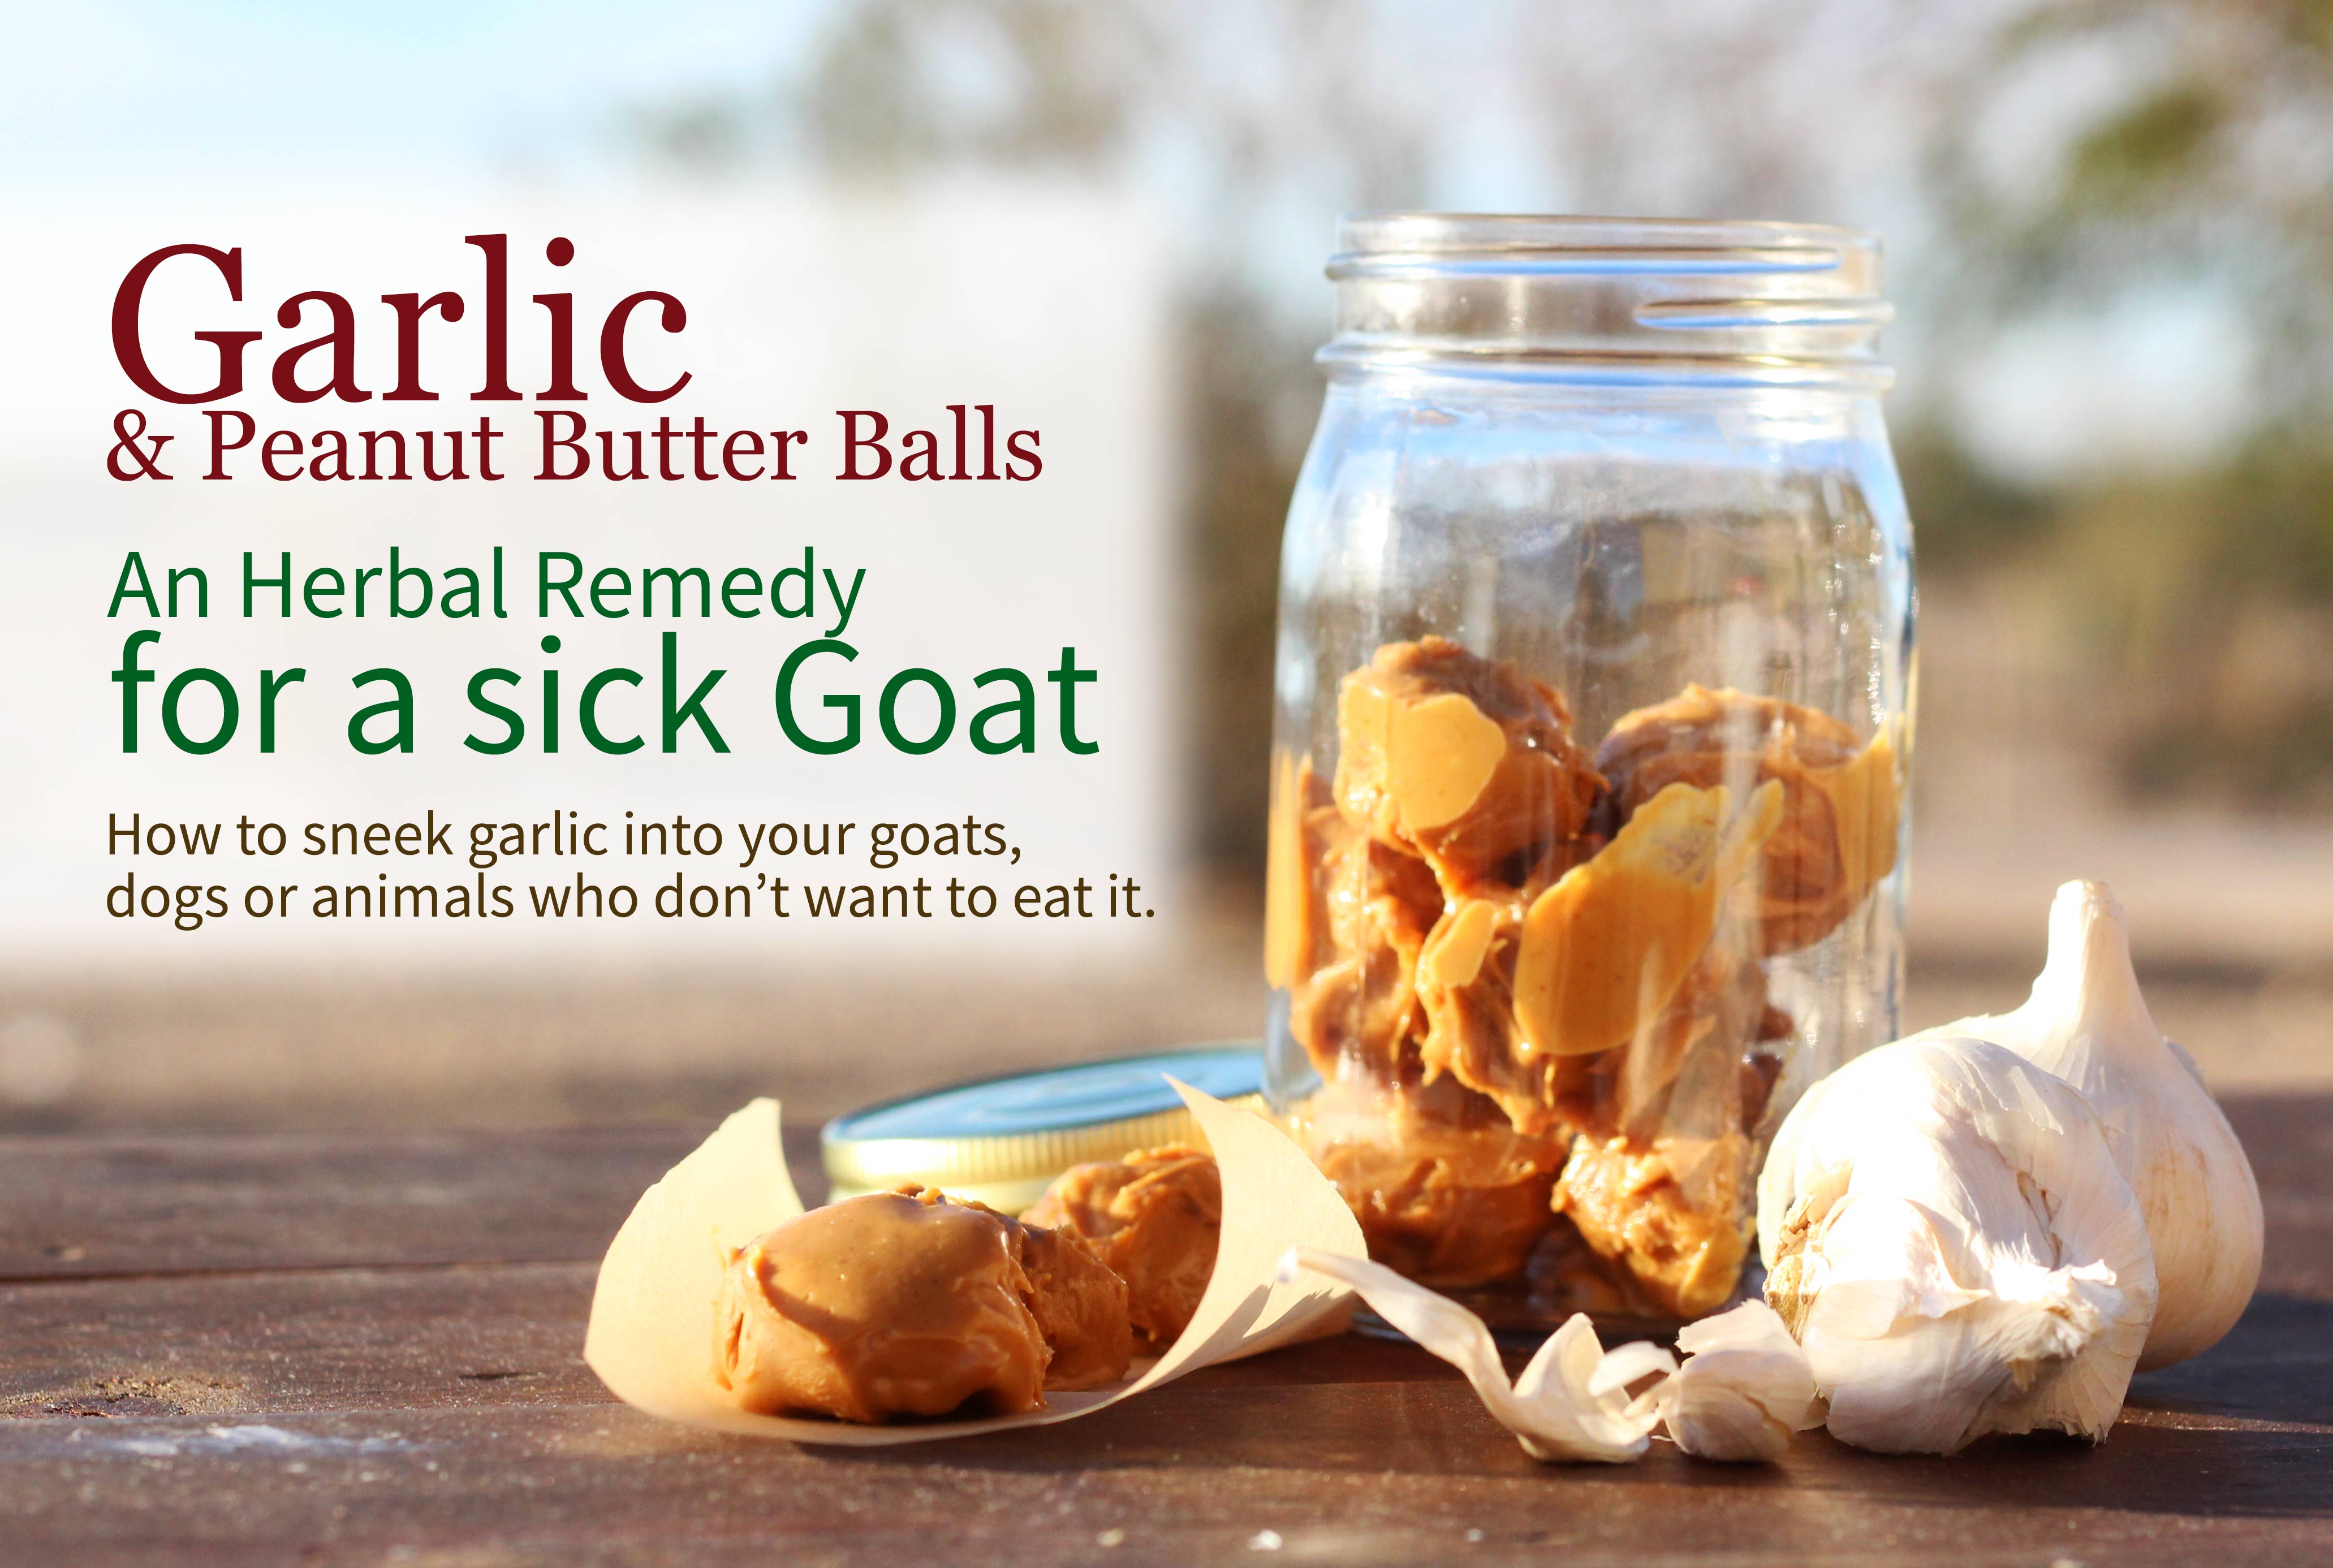 Garlic remedies are the best for a sick goat, dog, chicken, or yourself. Here's a recipe for garlic peanut butter balls for animals who don't like garlic.